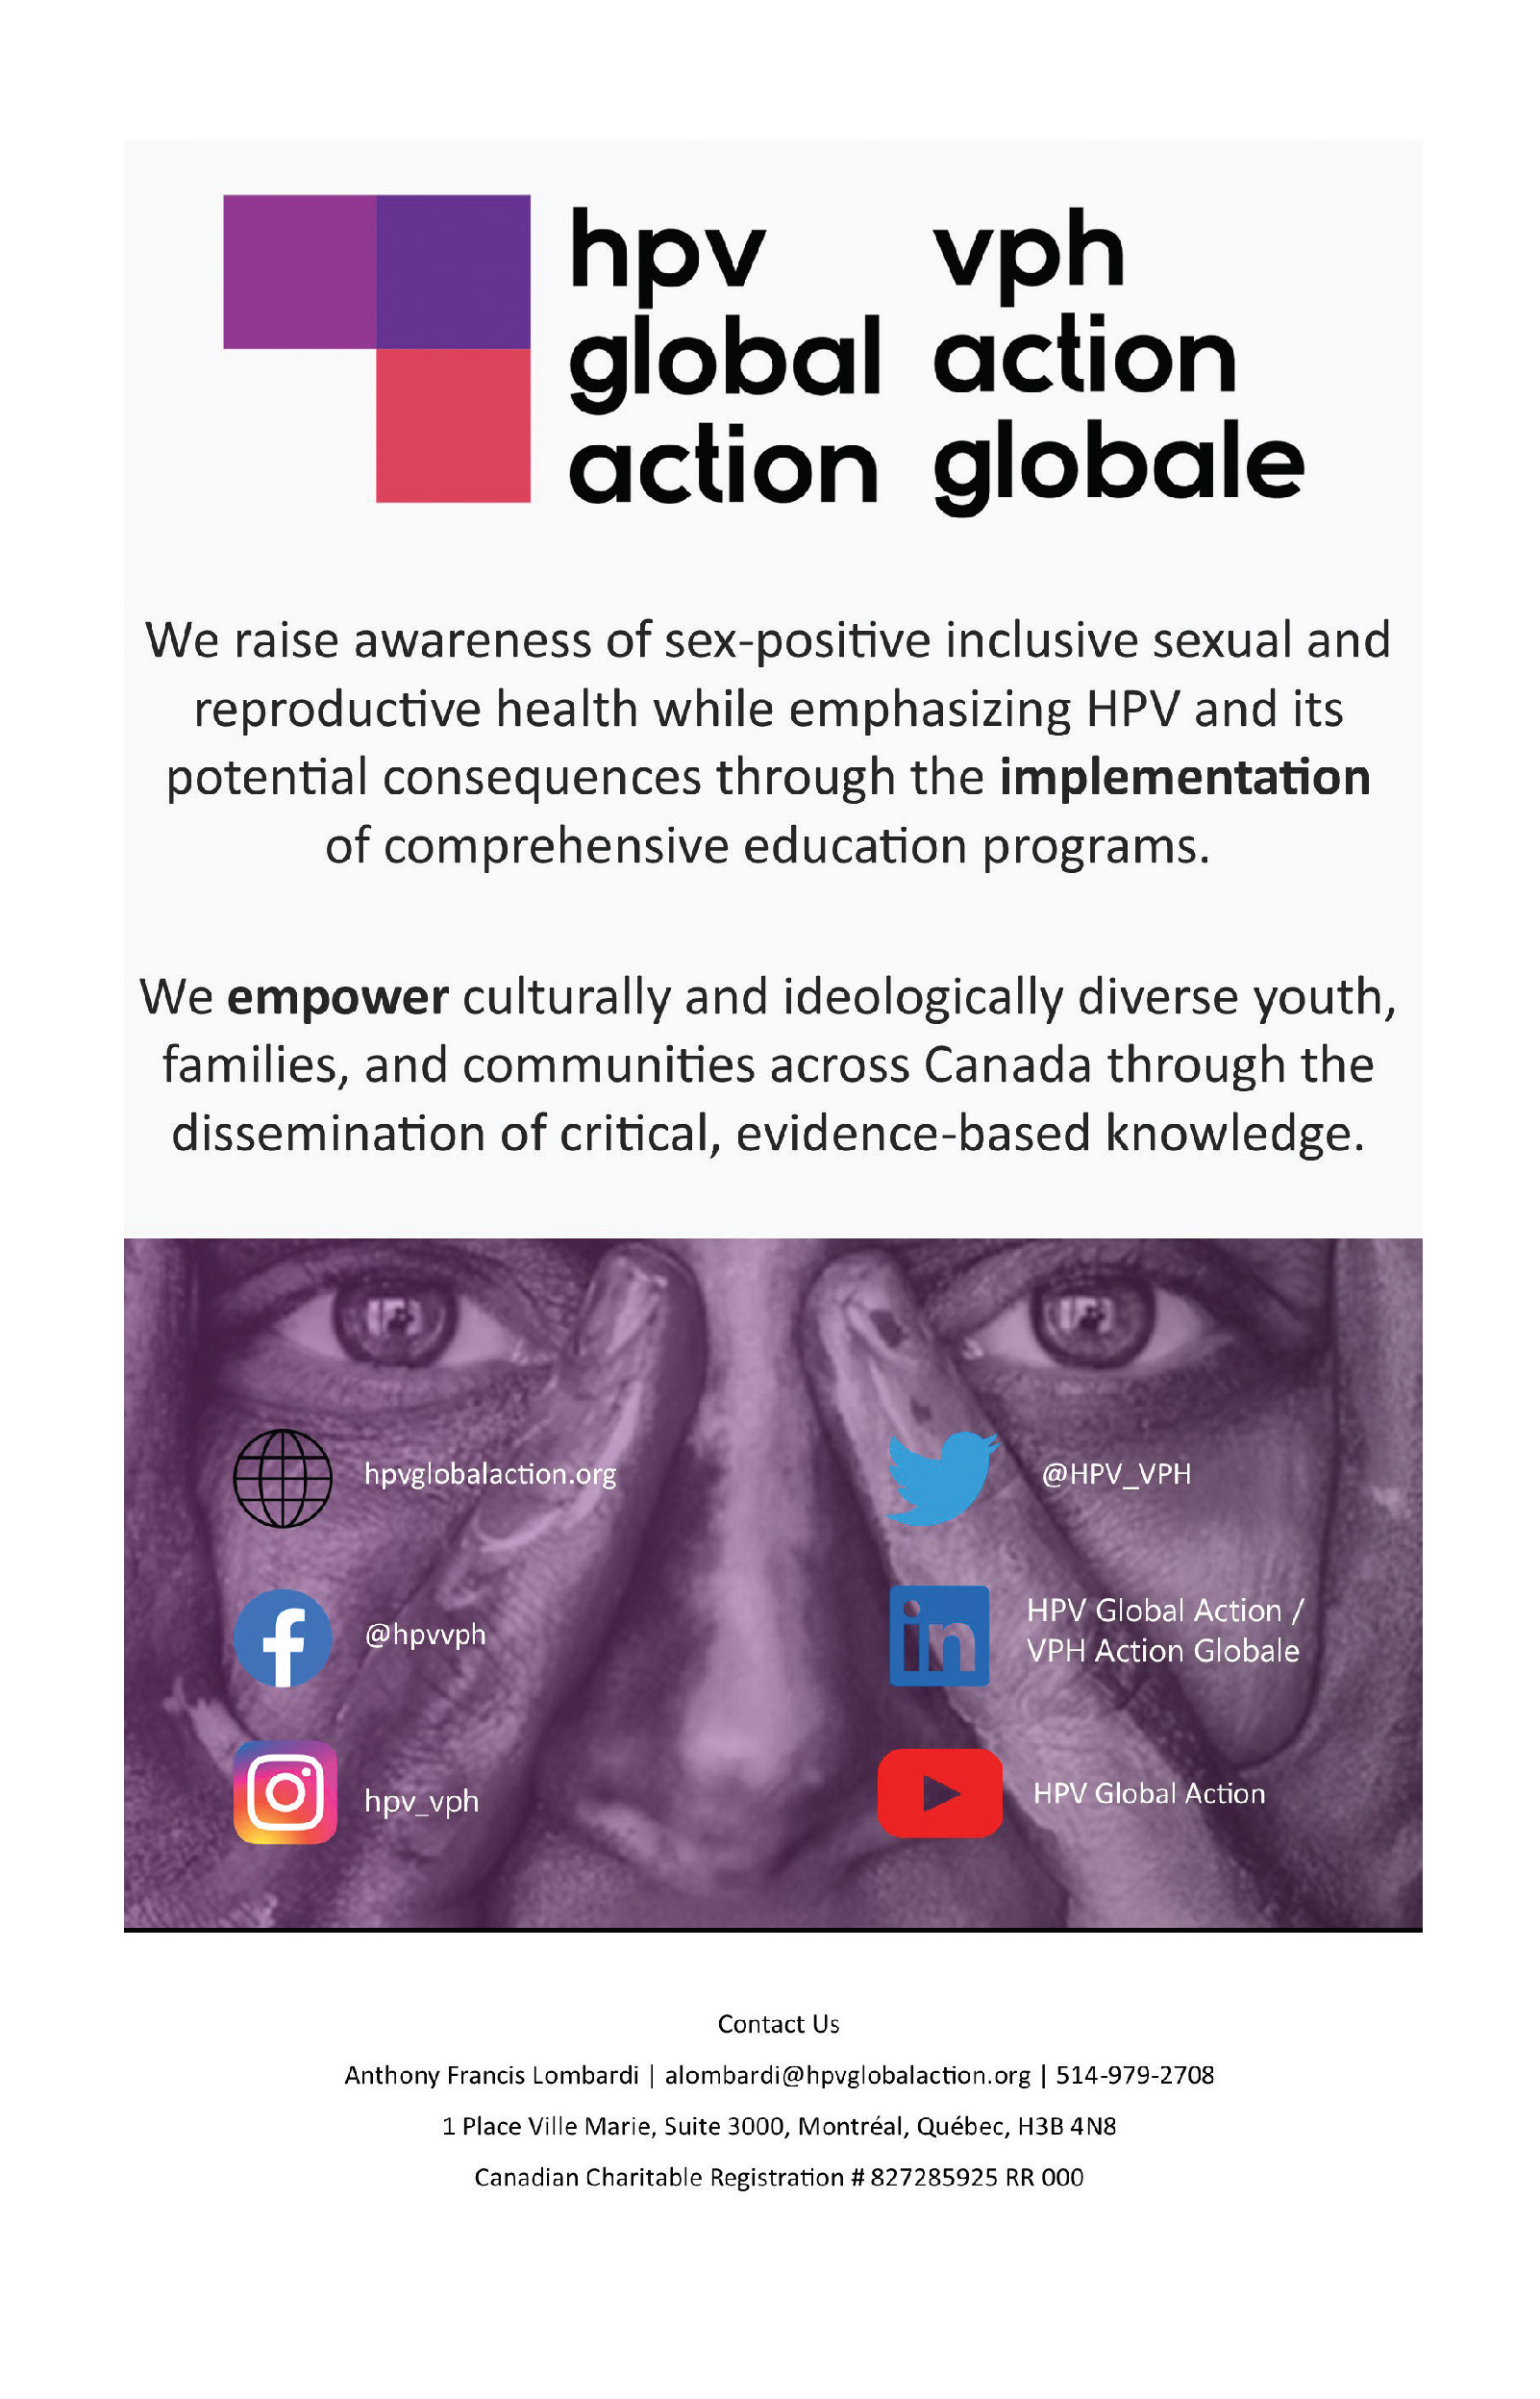 HPV GLOBAL ACTION / VPH ACTION GLOBAL